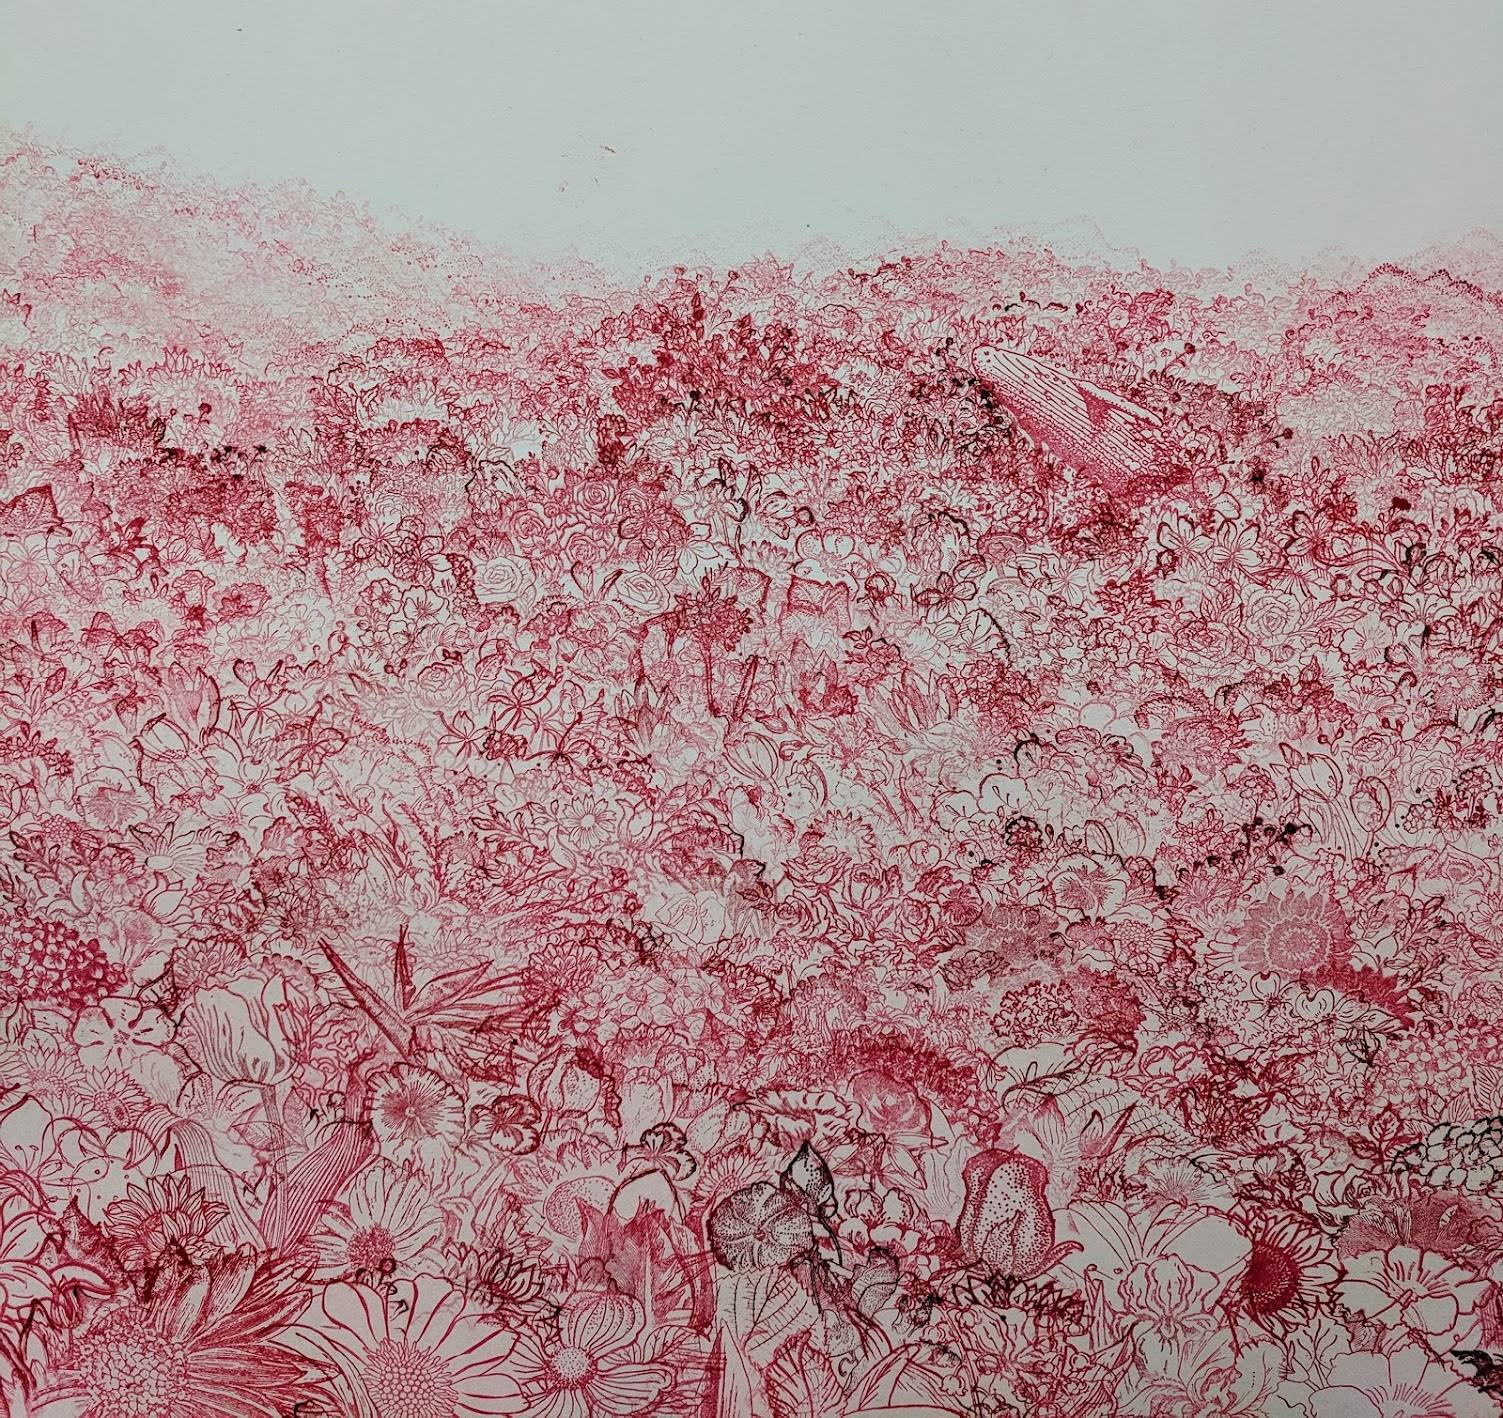 Stamped drawing full of flowers, done in red ink.